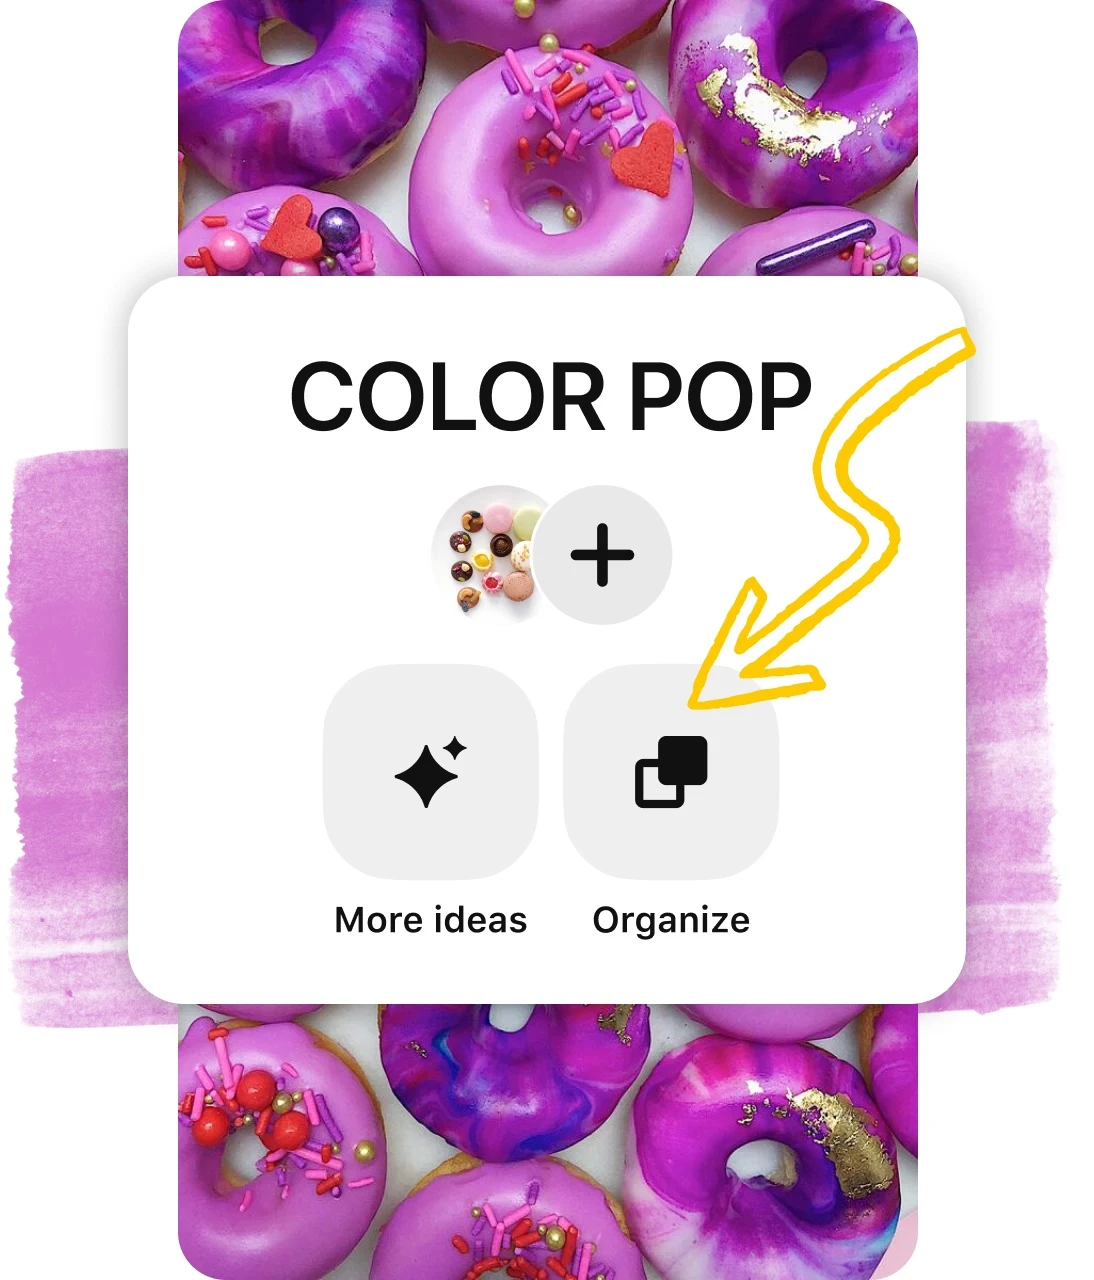 Snapshot of pin board header overlaid on pin of purple donuts